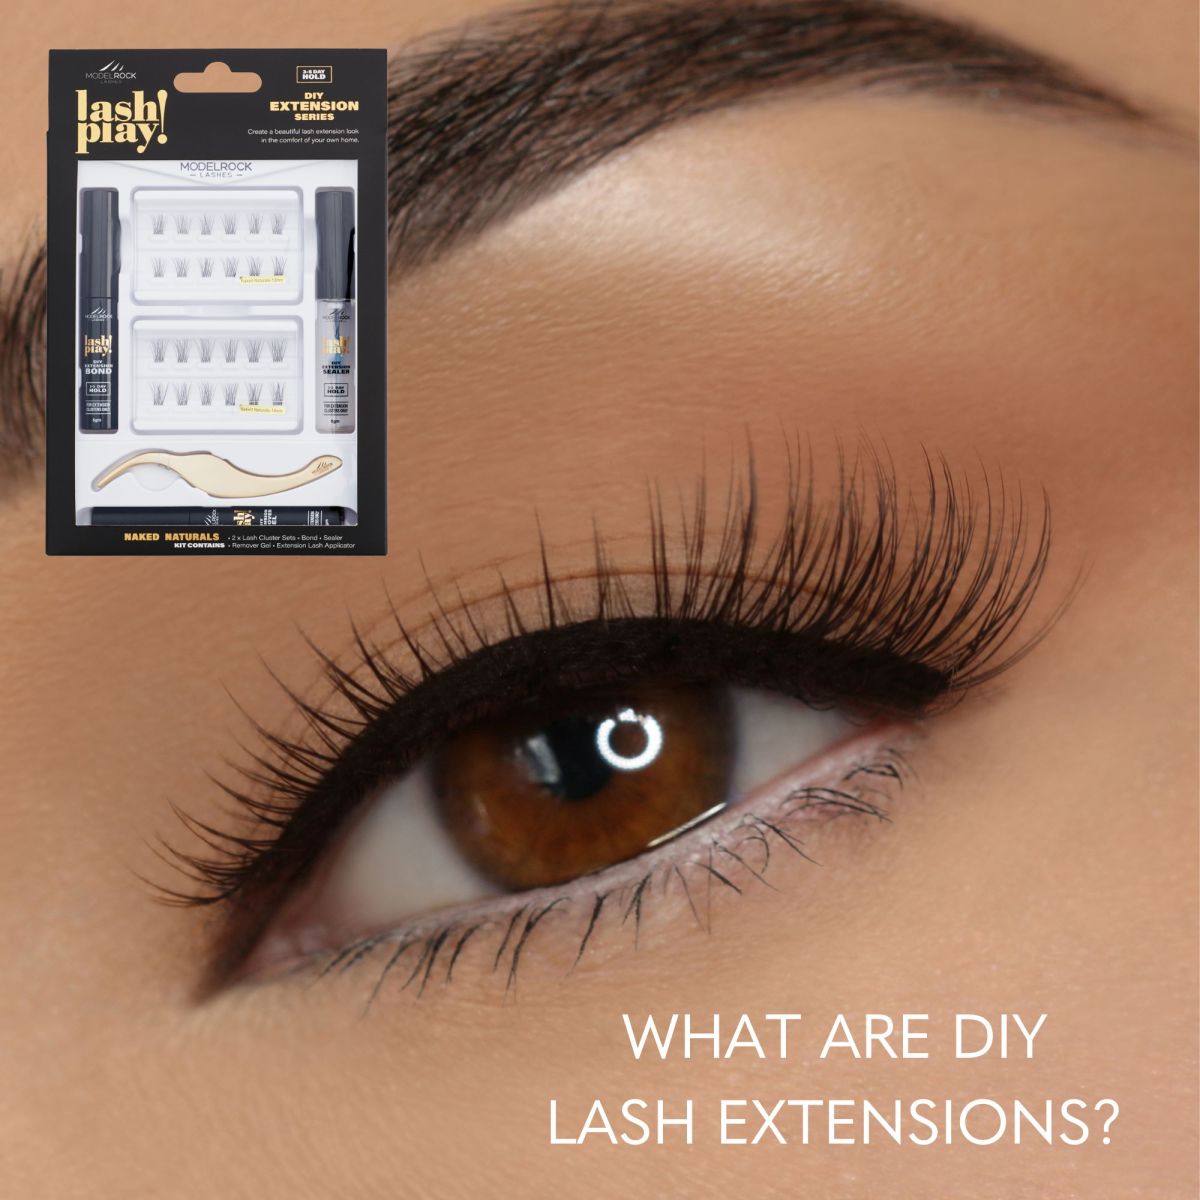 What are DIY lash extensions?